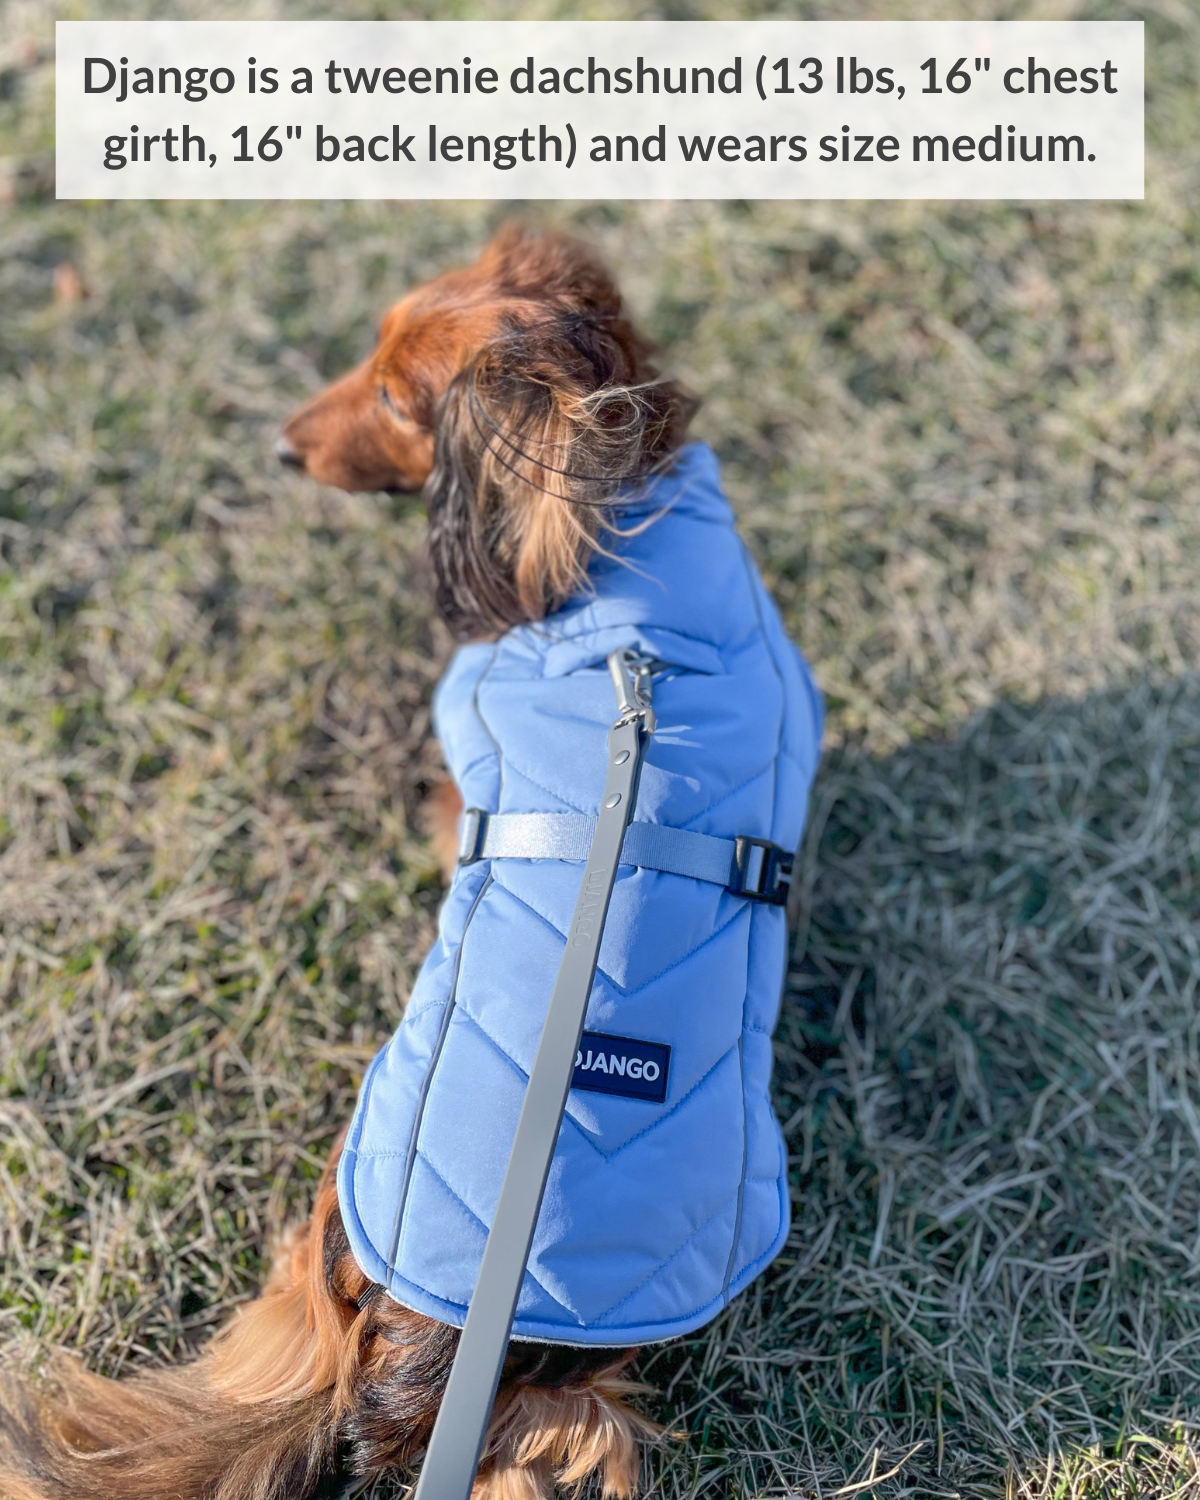 Designed for all winter weather, DJANGO's very warm and insulated winter dog coat will protect your dog during every cold weather outing and adventure. Django the tweenie dachshund, featured here, has a 16 inch chest girth and 16 inch back length and wears size medium perfectly. - djangobrand.com